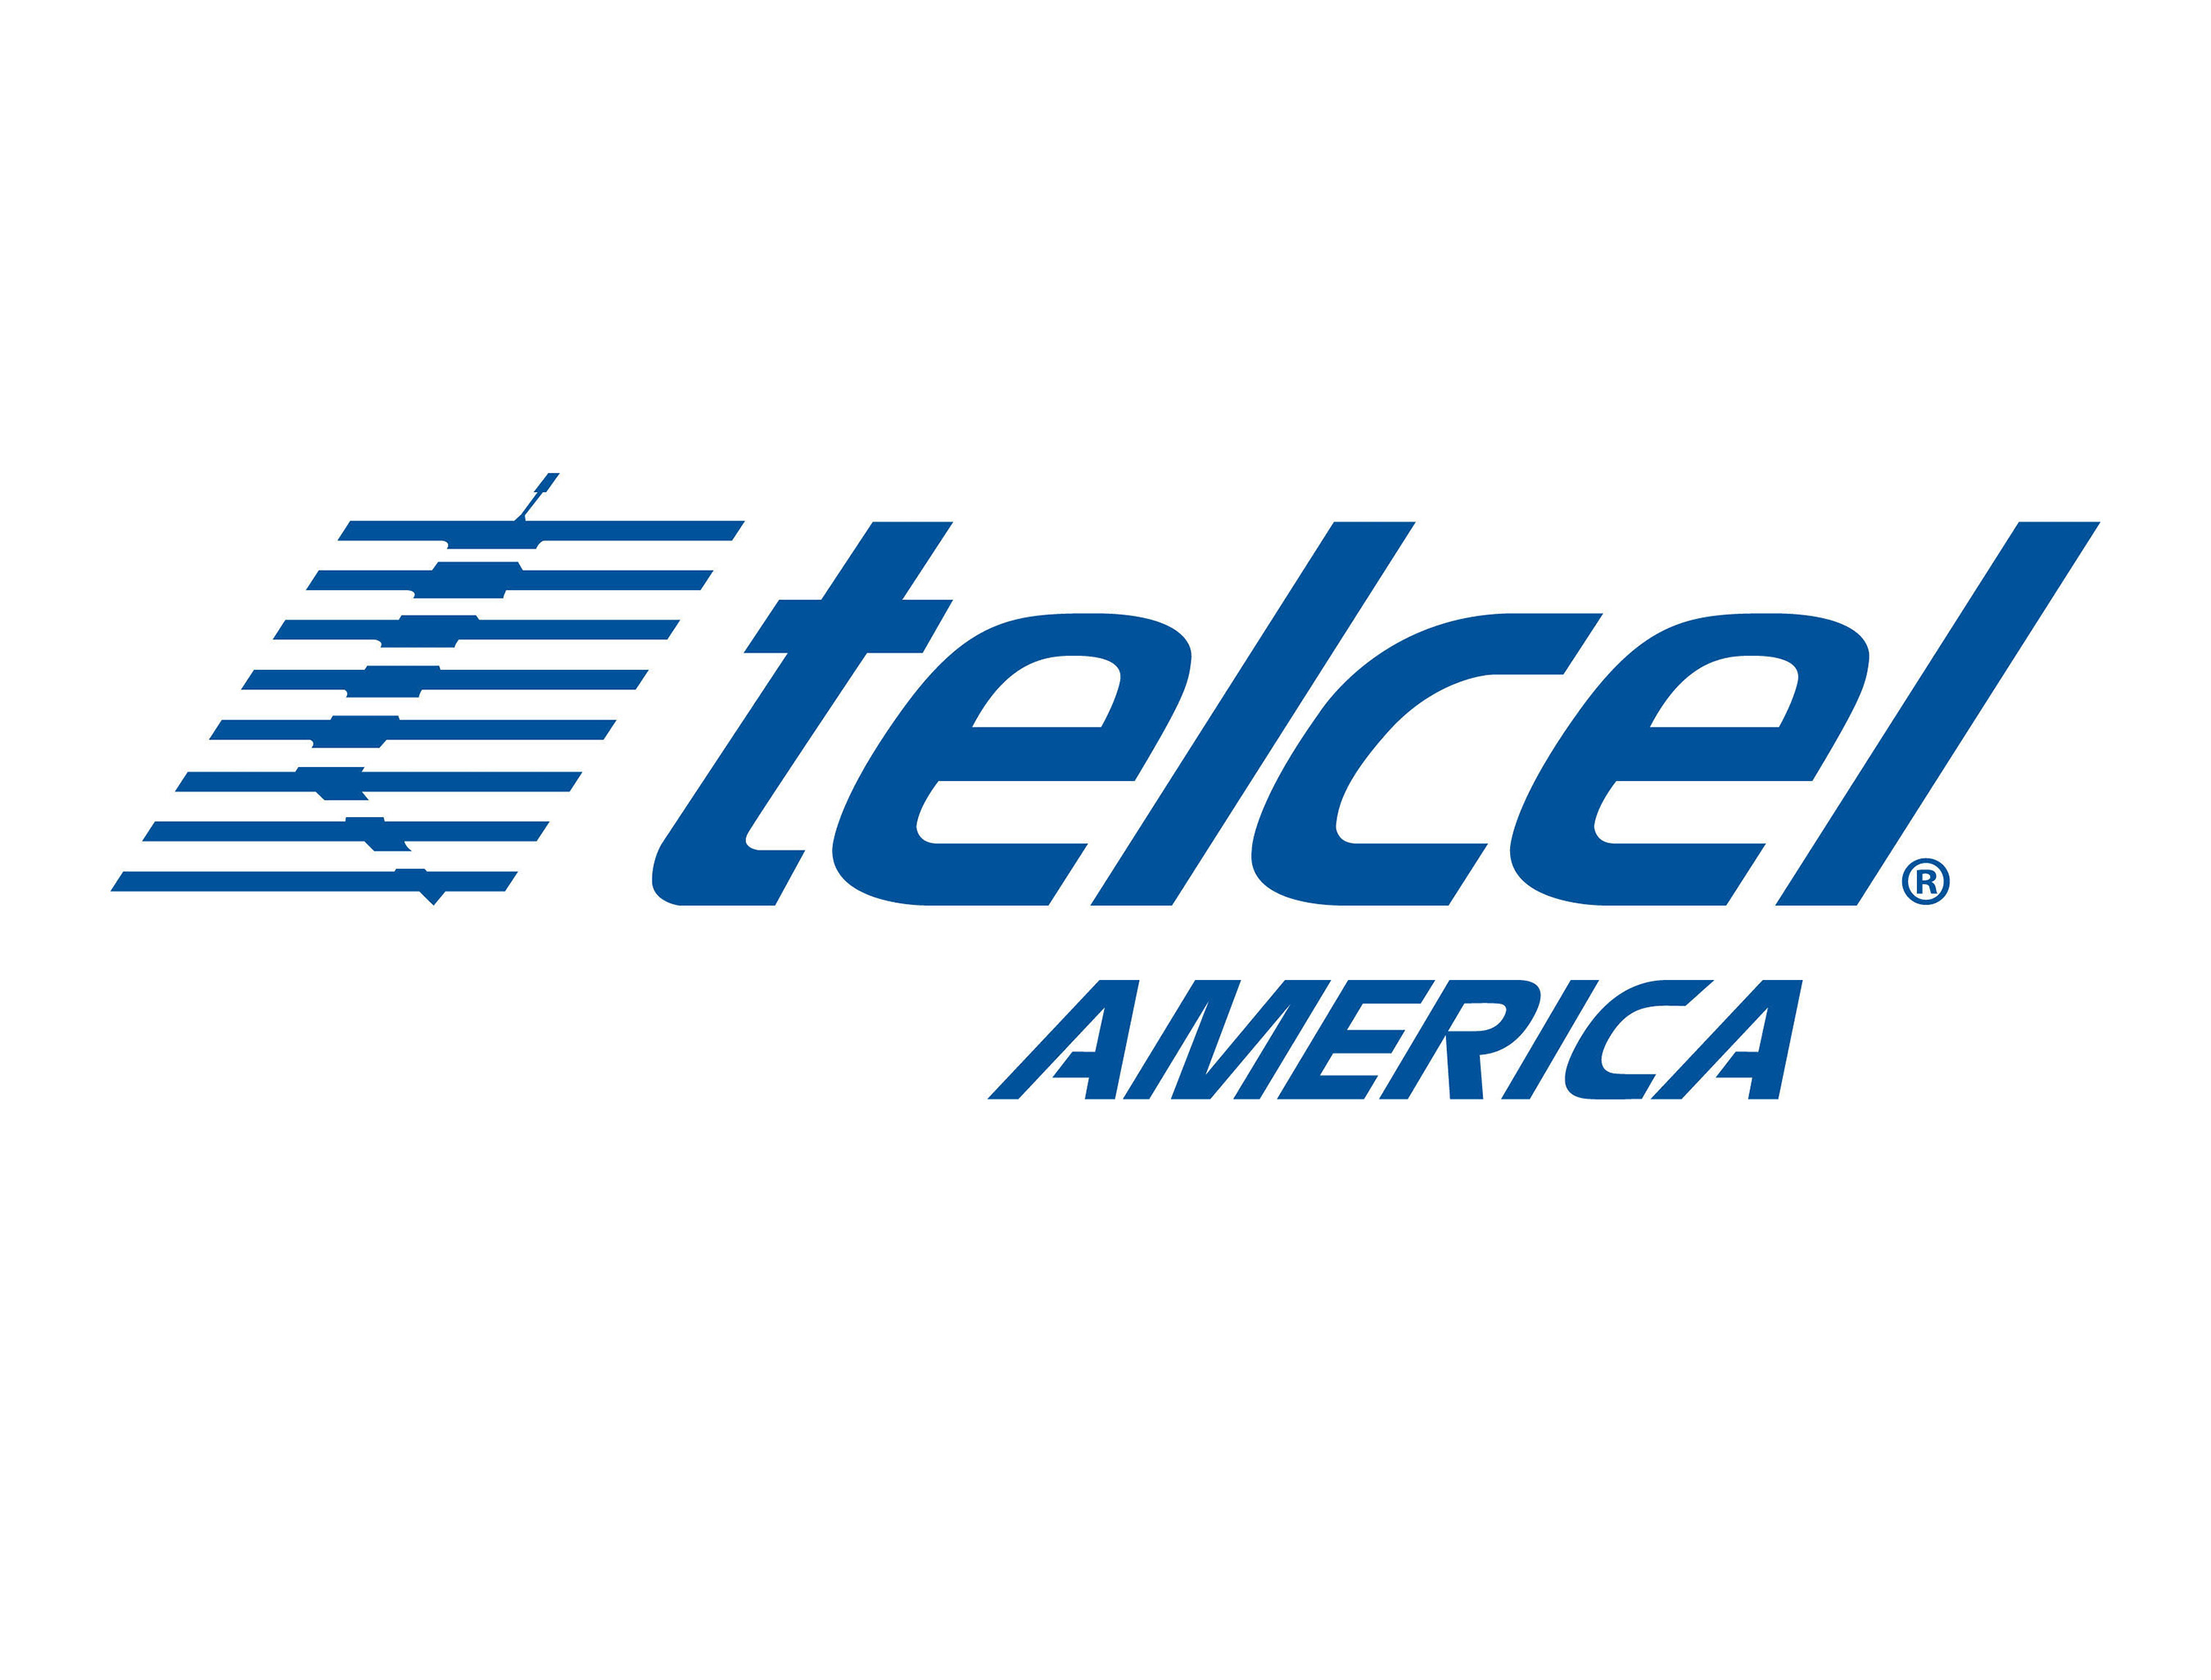 If you were a Telcel America customer whose "unlimited" data plan was slowed, cut off or terminated before your plan expired, could get a cash refund from a class action settlement.